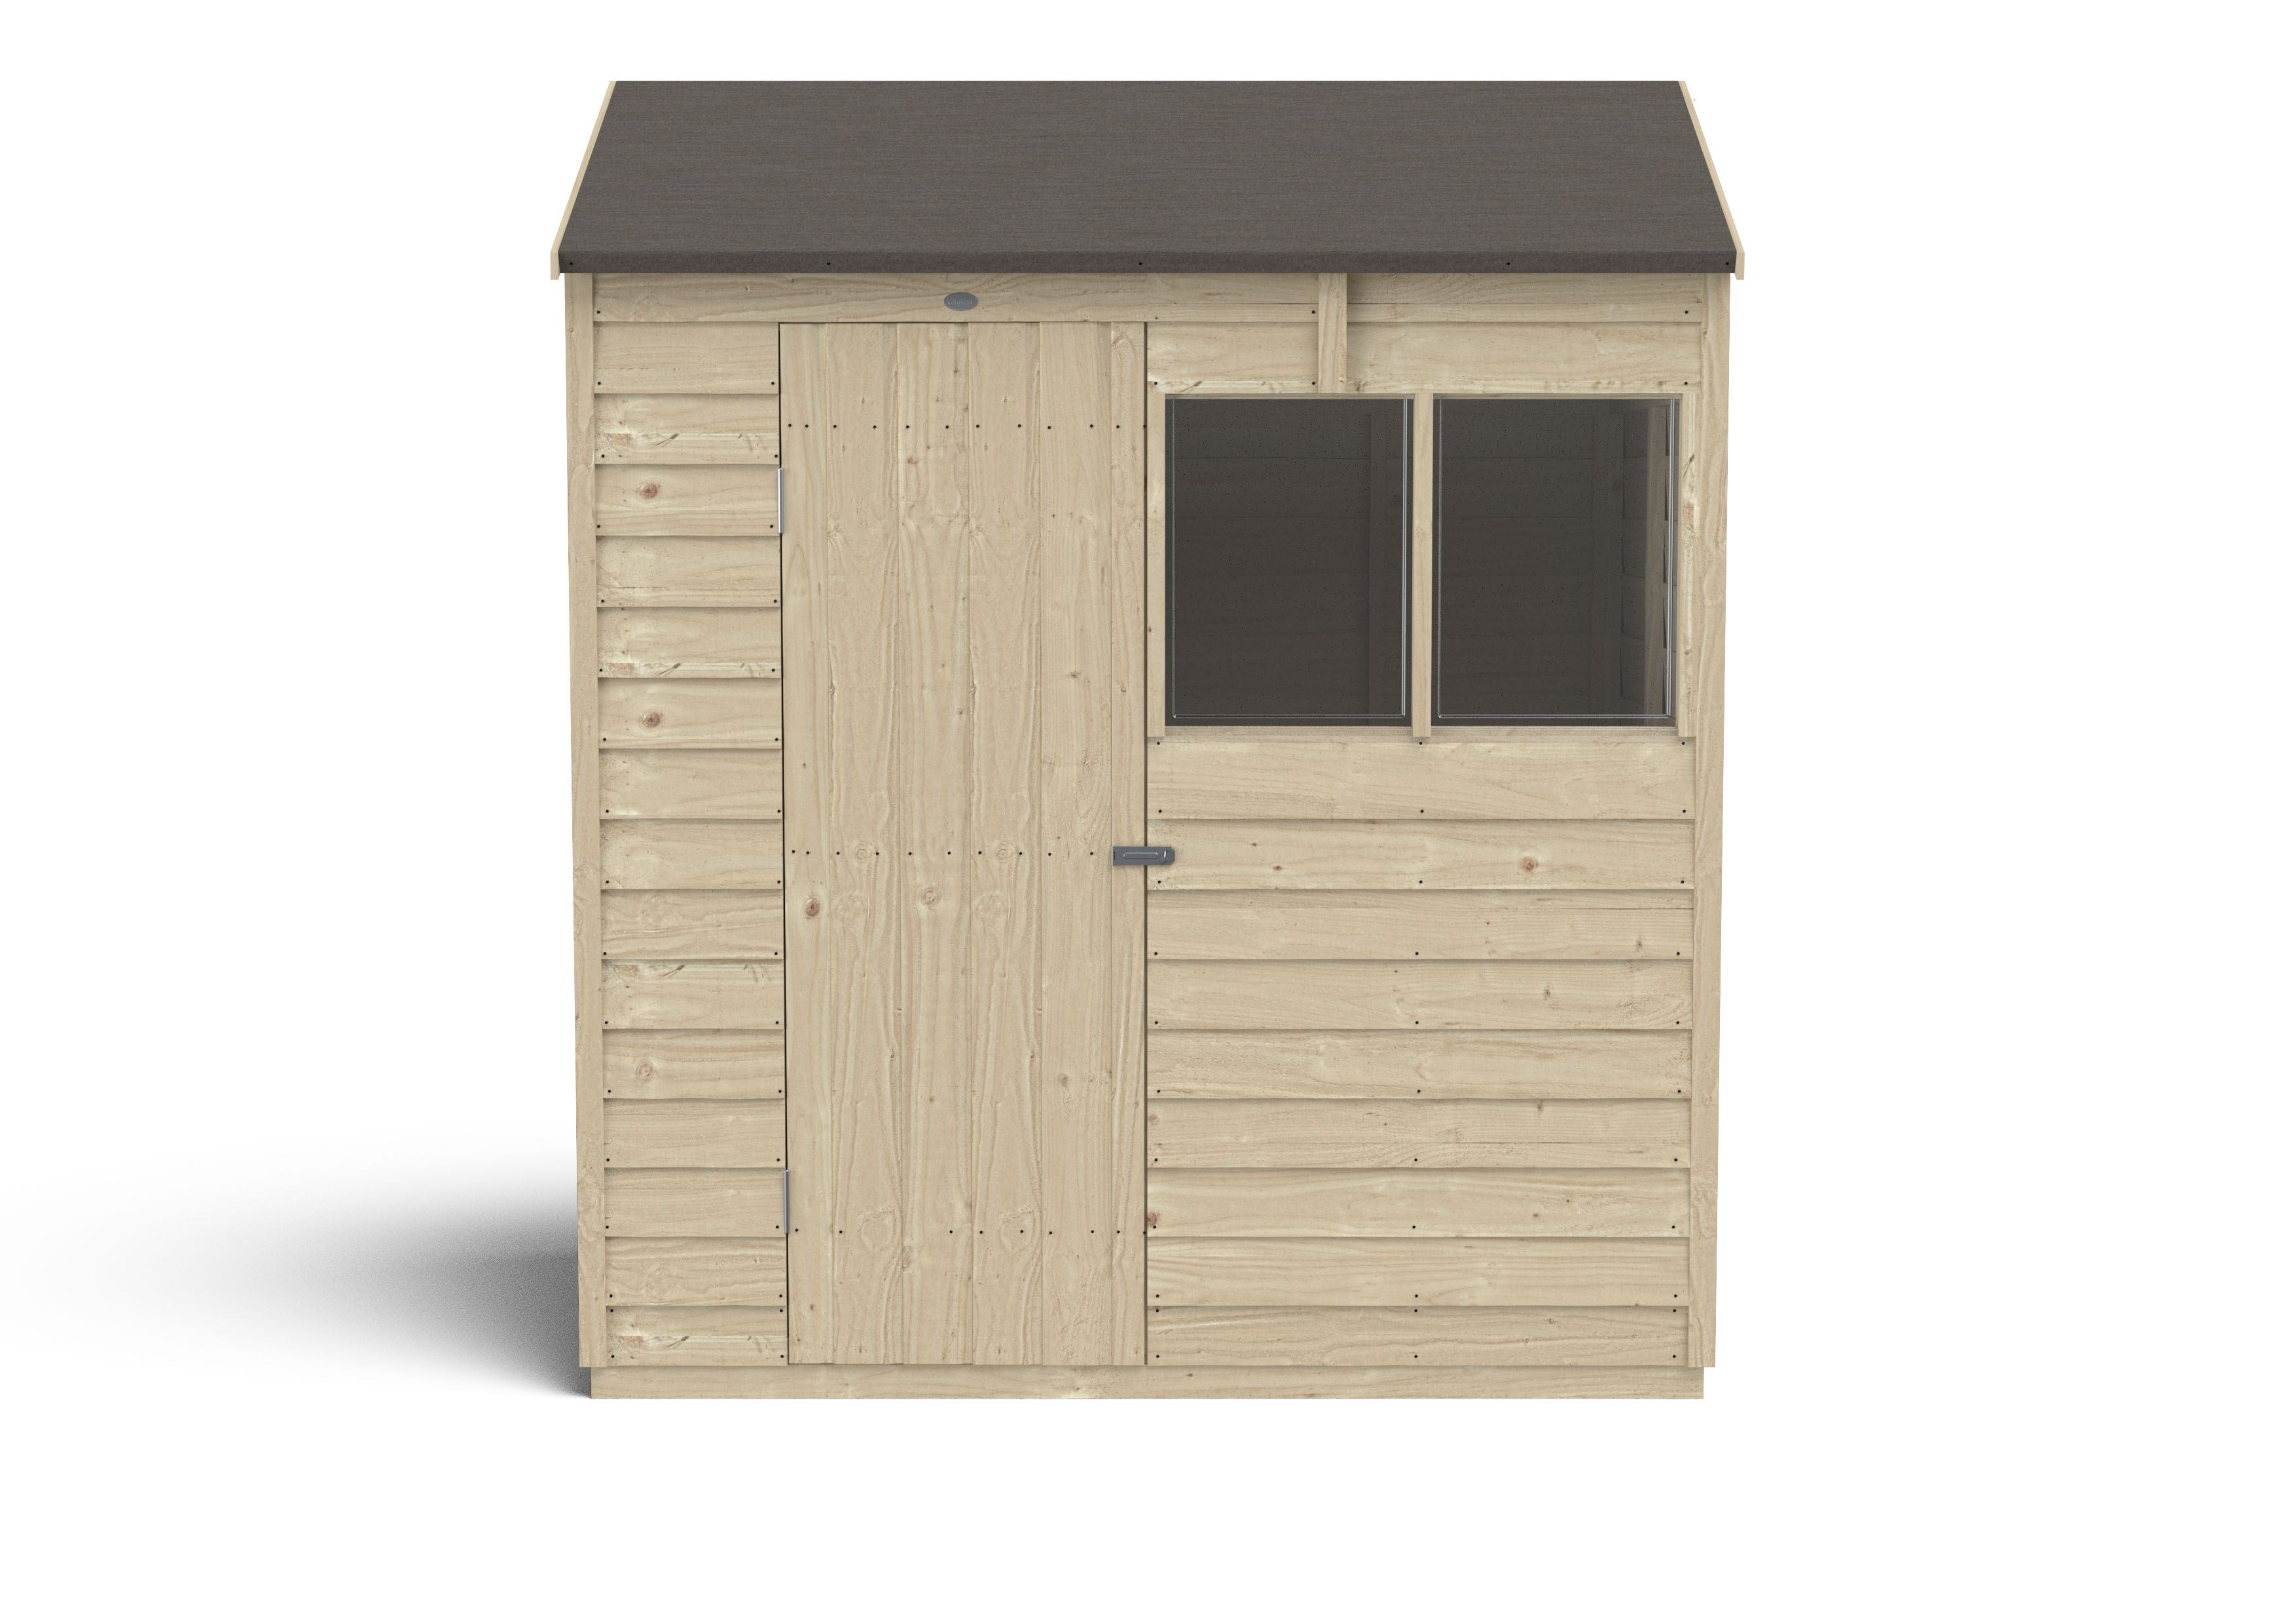 Forest Garden Overlap 6x4 ft Reverse apex Wooden Pressure treated Shed with floor & 2 windows (Base included)